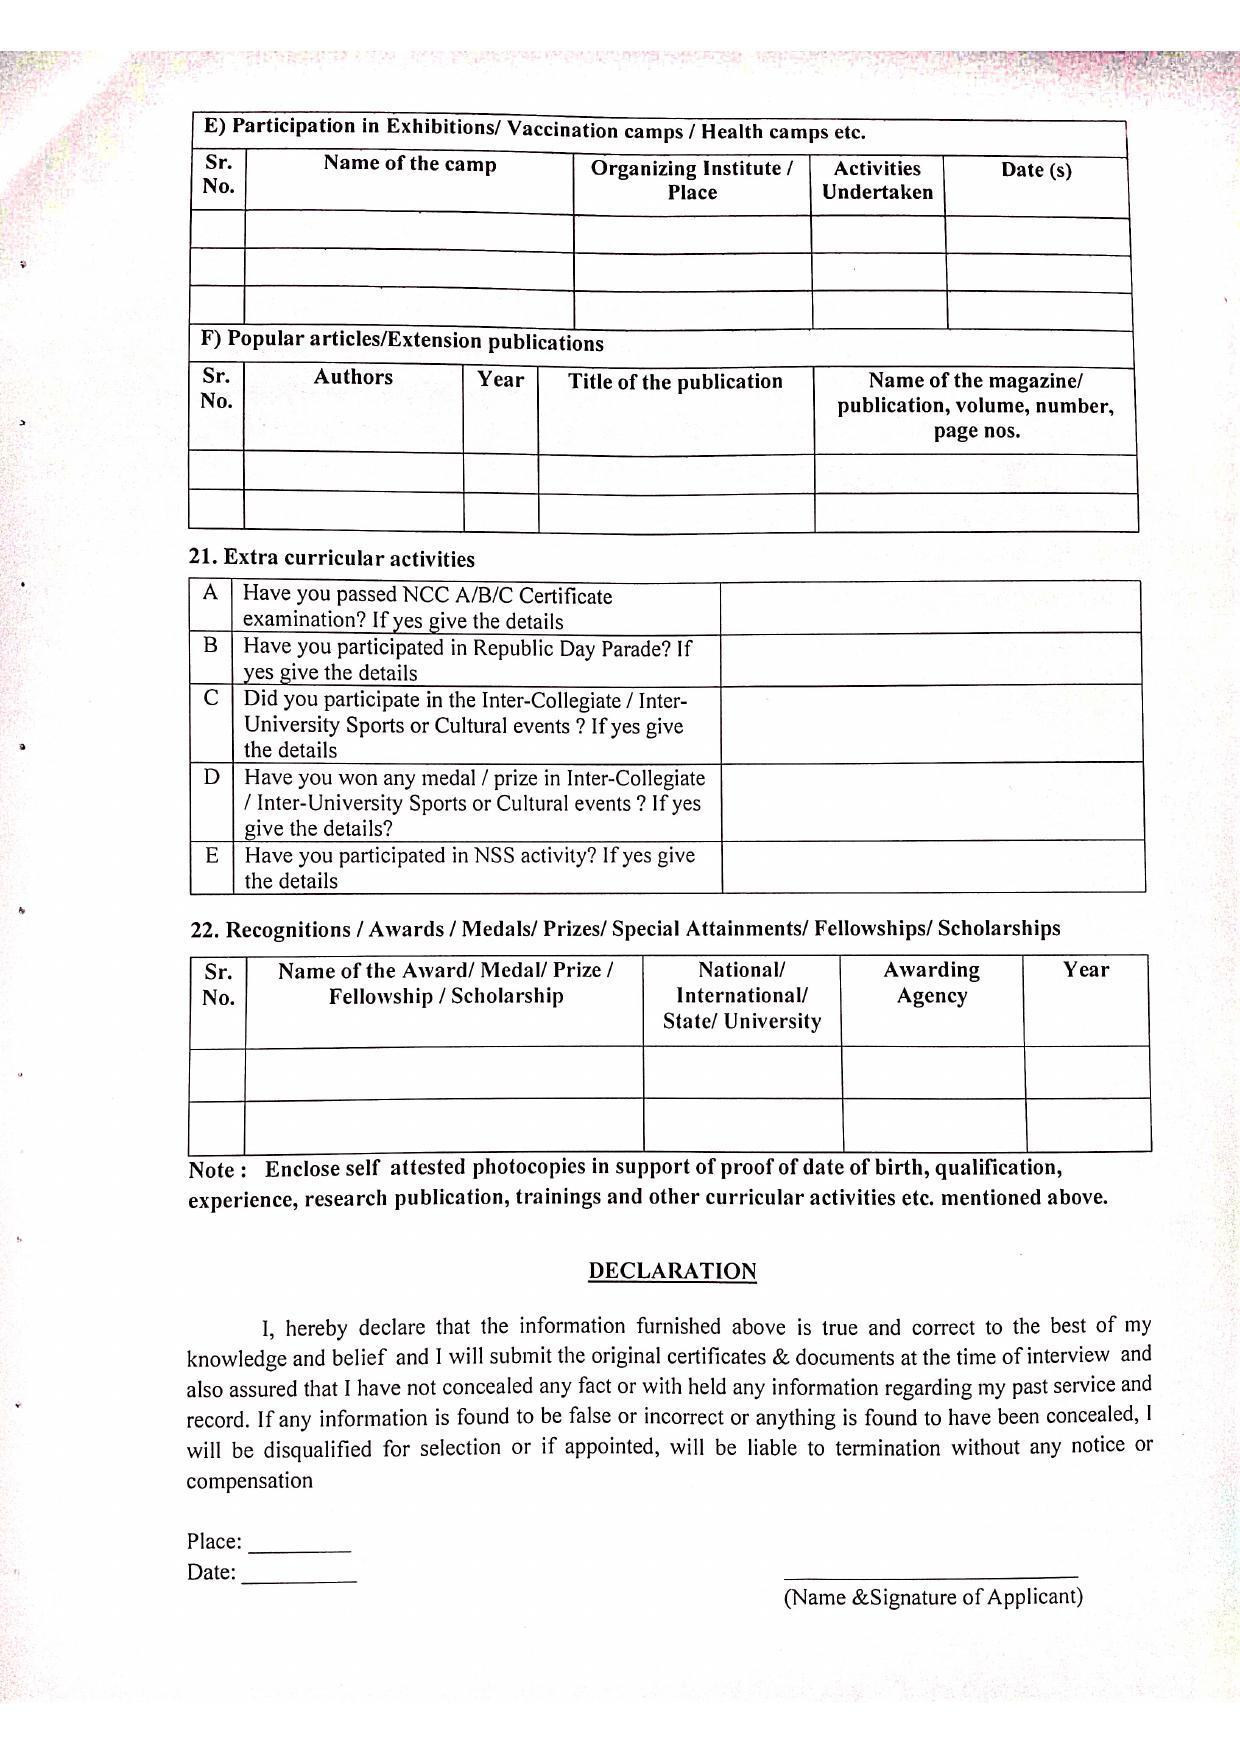 MAFSU Recruitment 2022 for Subject Matter Specialist - Page 8